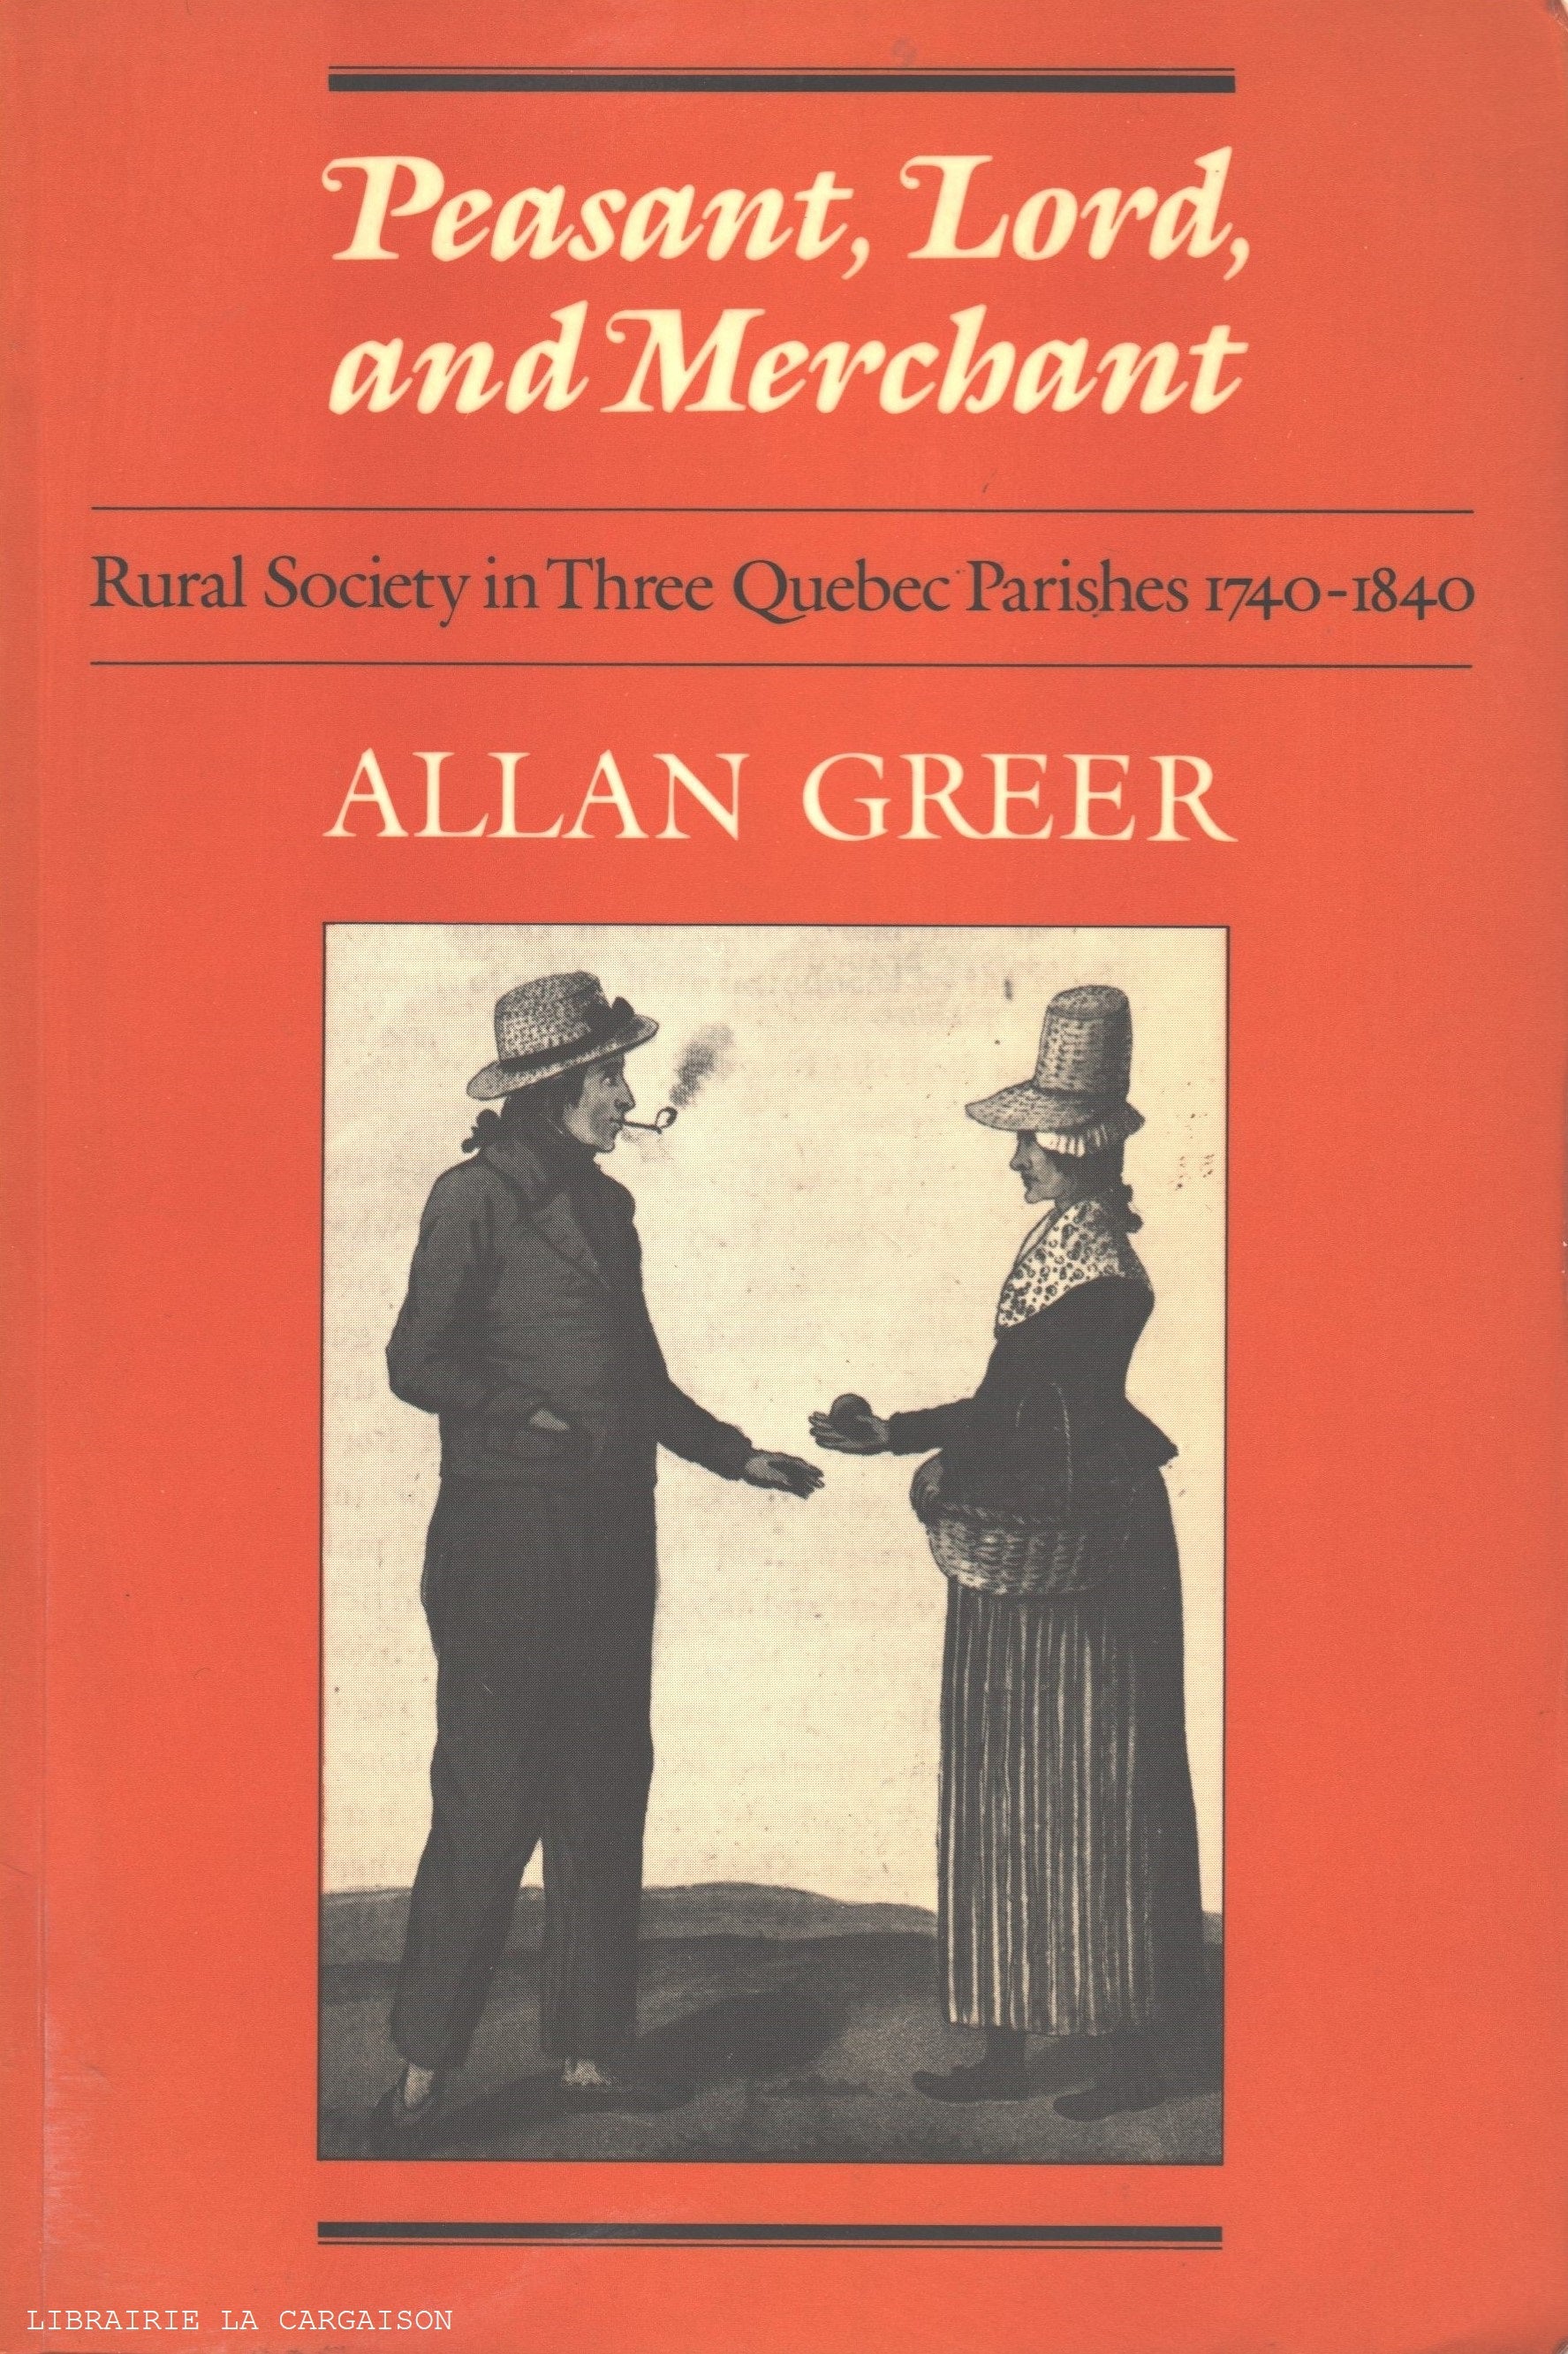 GREER, ALLAN. Peasant, Lord, and Merchant : Rural Society in Three Quebec Parishes 1740-1840